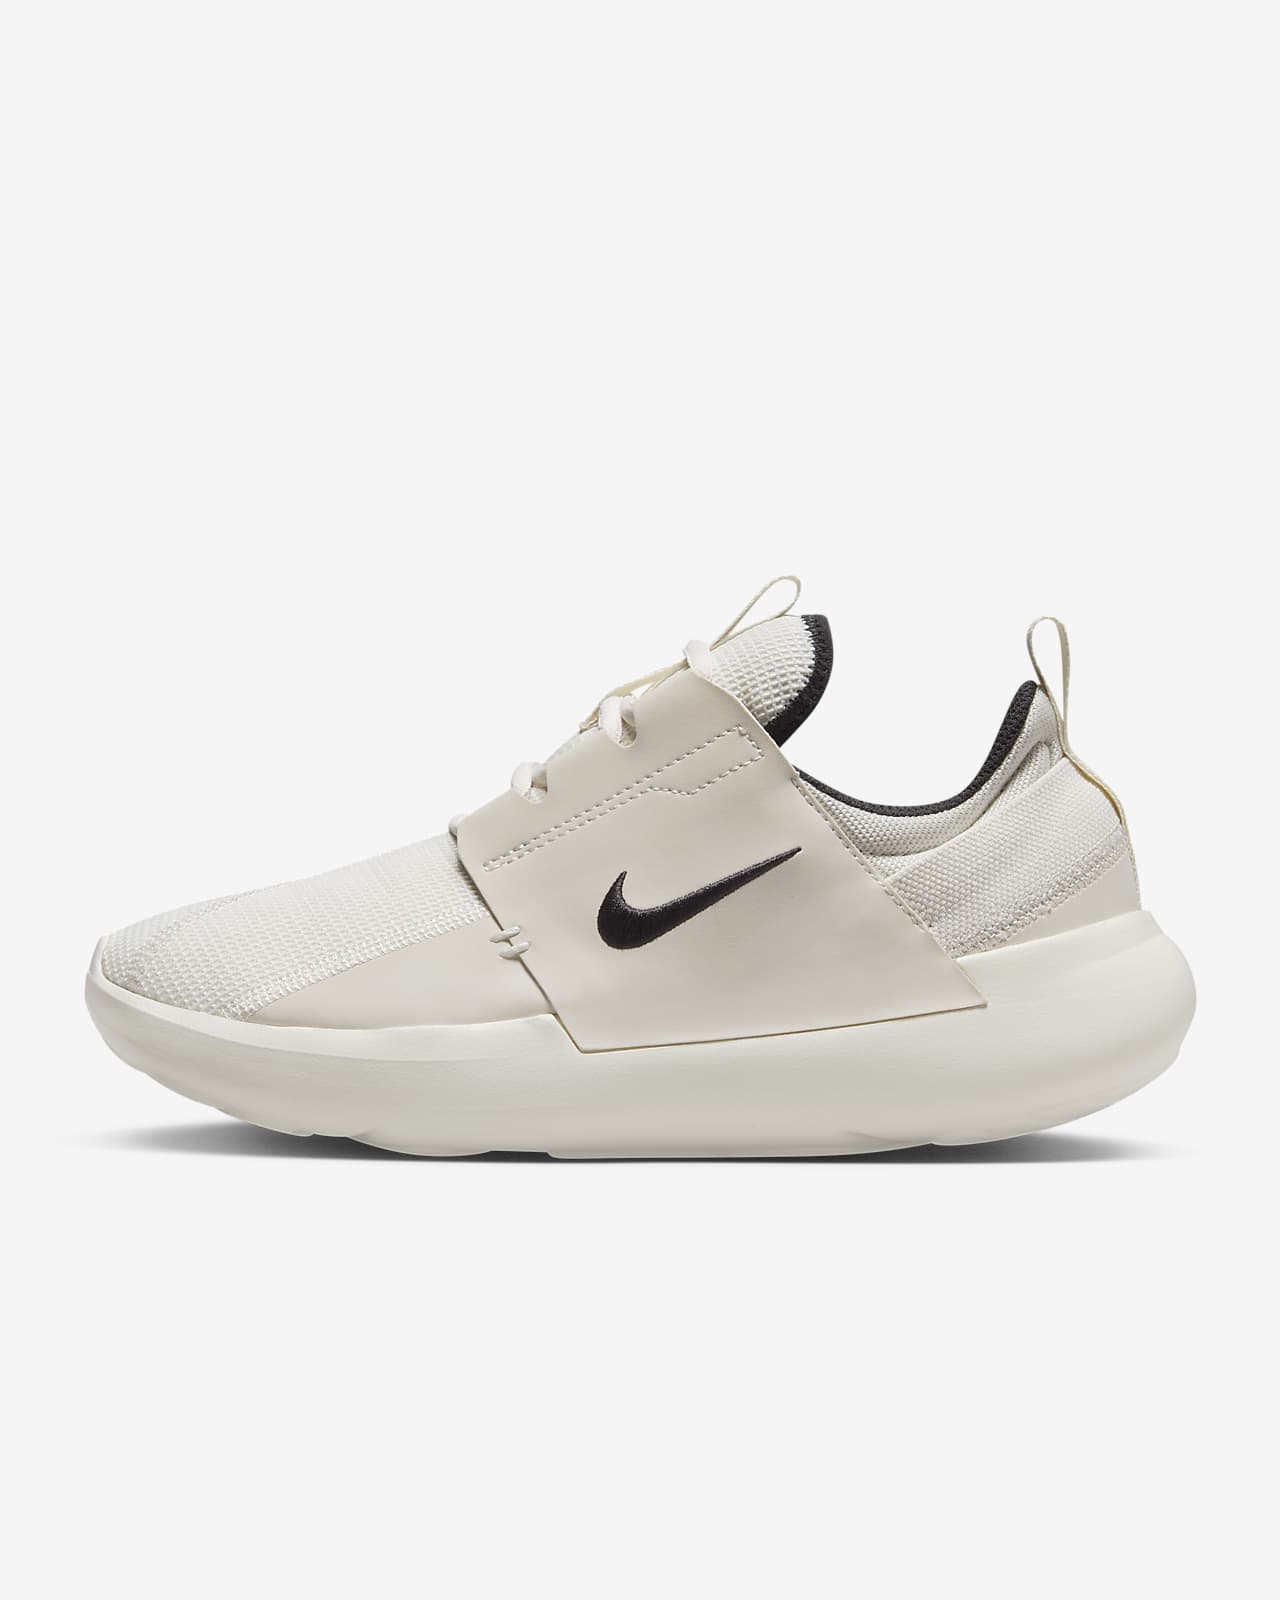 Chaussure Nike E-Series AD pour femme